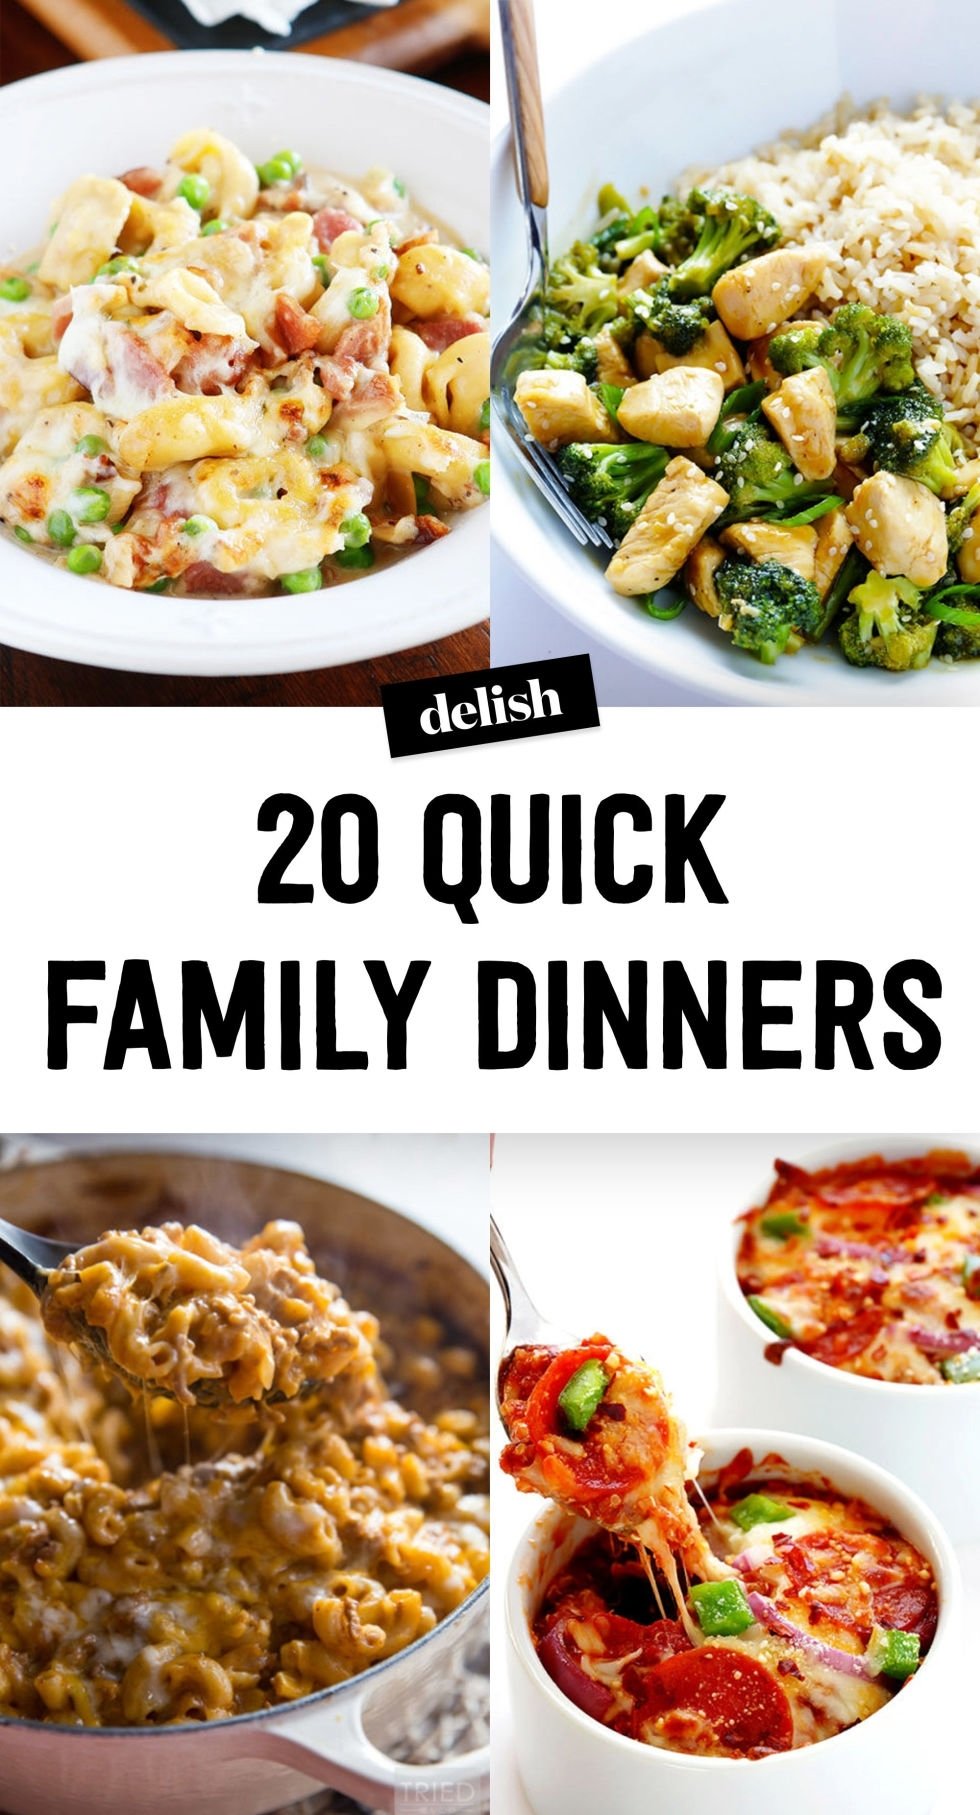 10 Attractive Easy Dinner Ideas For Family download easy fast dinner recipes for family food photos 3 2022